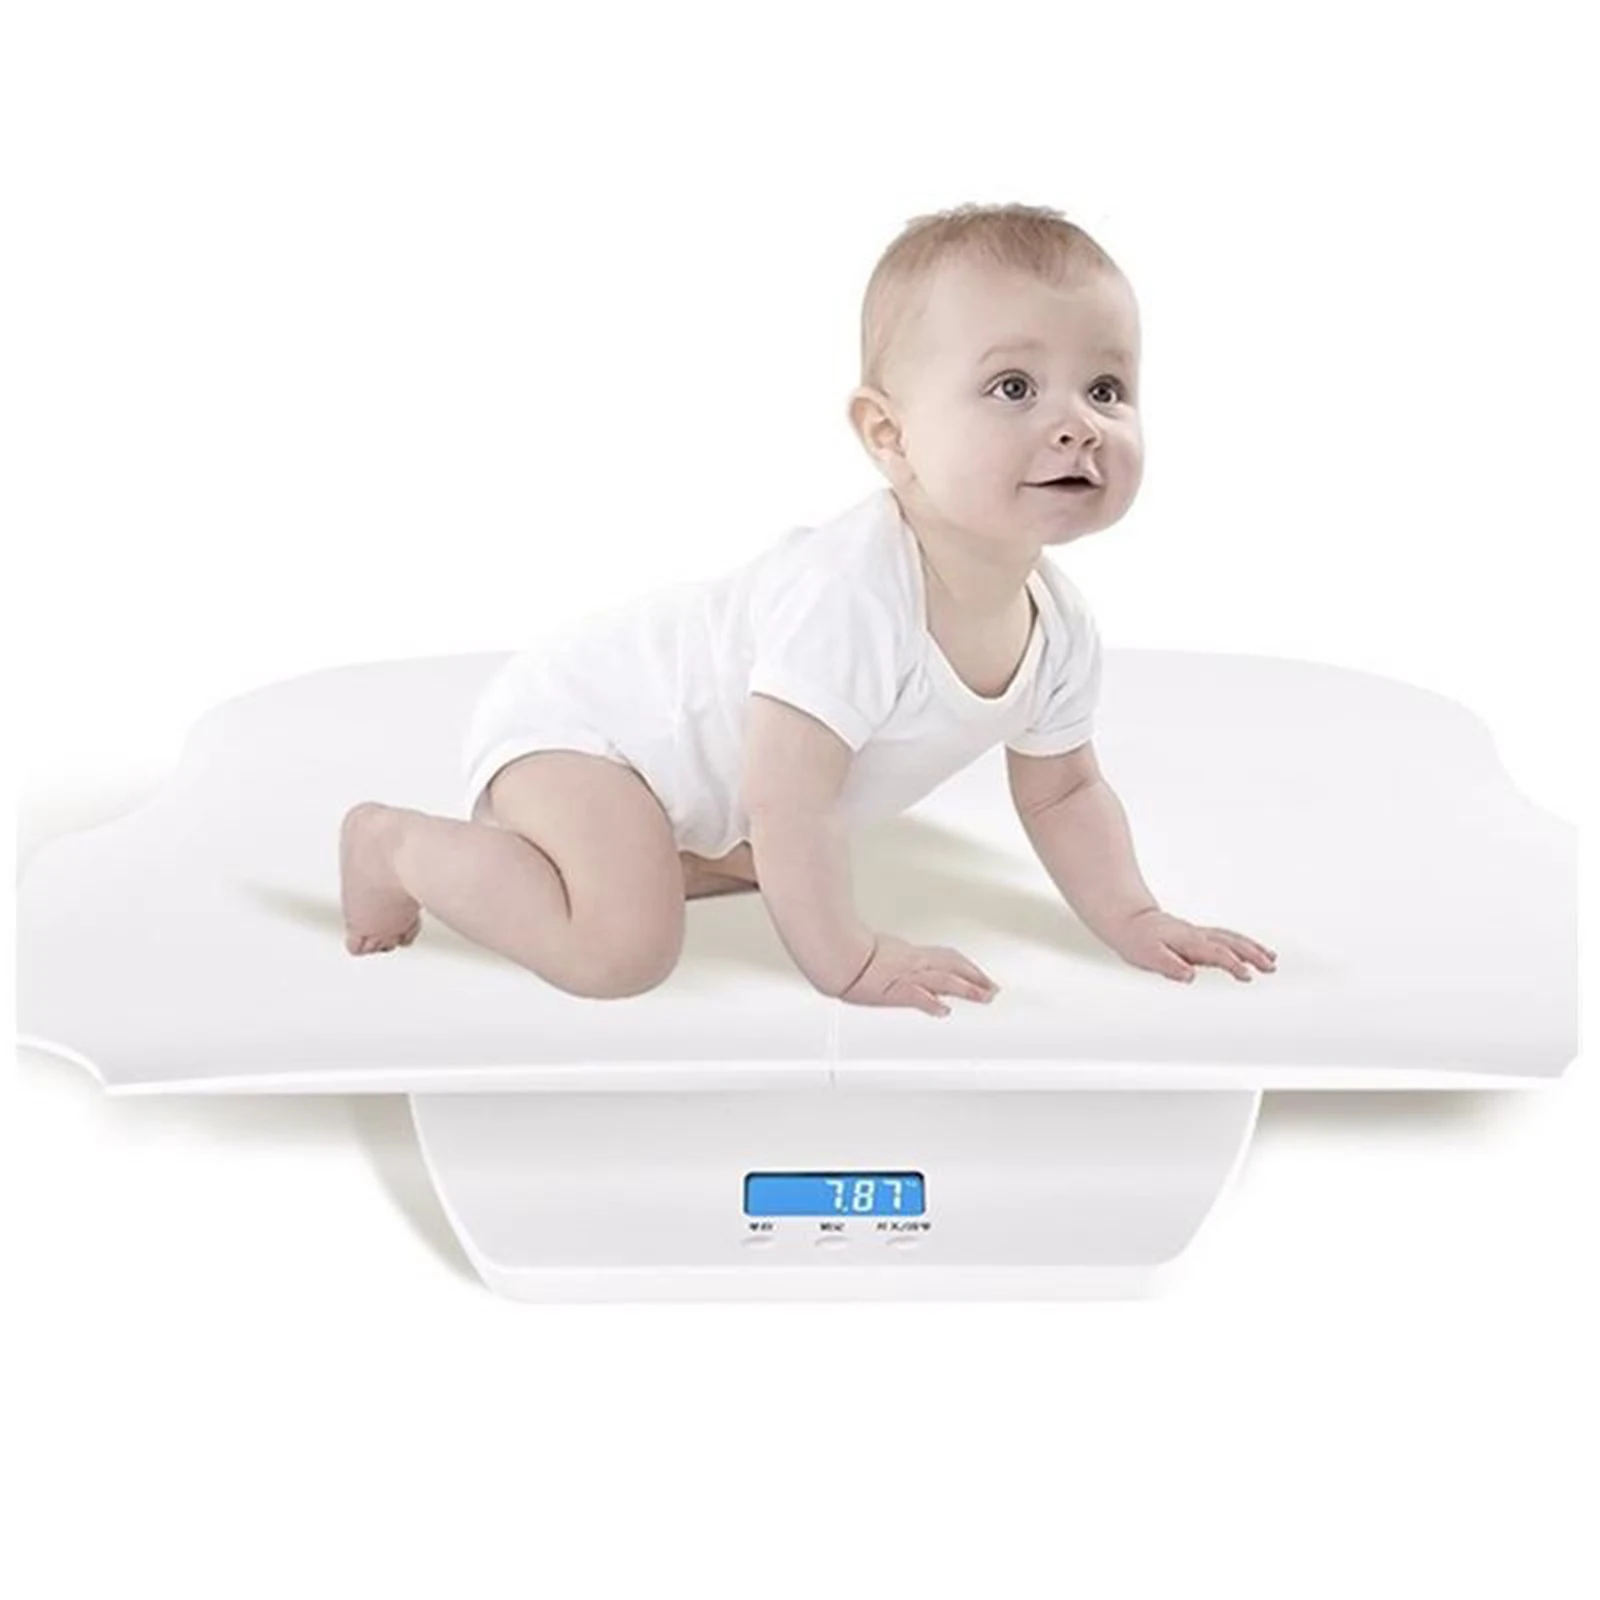 Electronic Digital Baby Weighing Scale Infant Pet Newborn Puppy Cat Scales